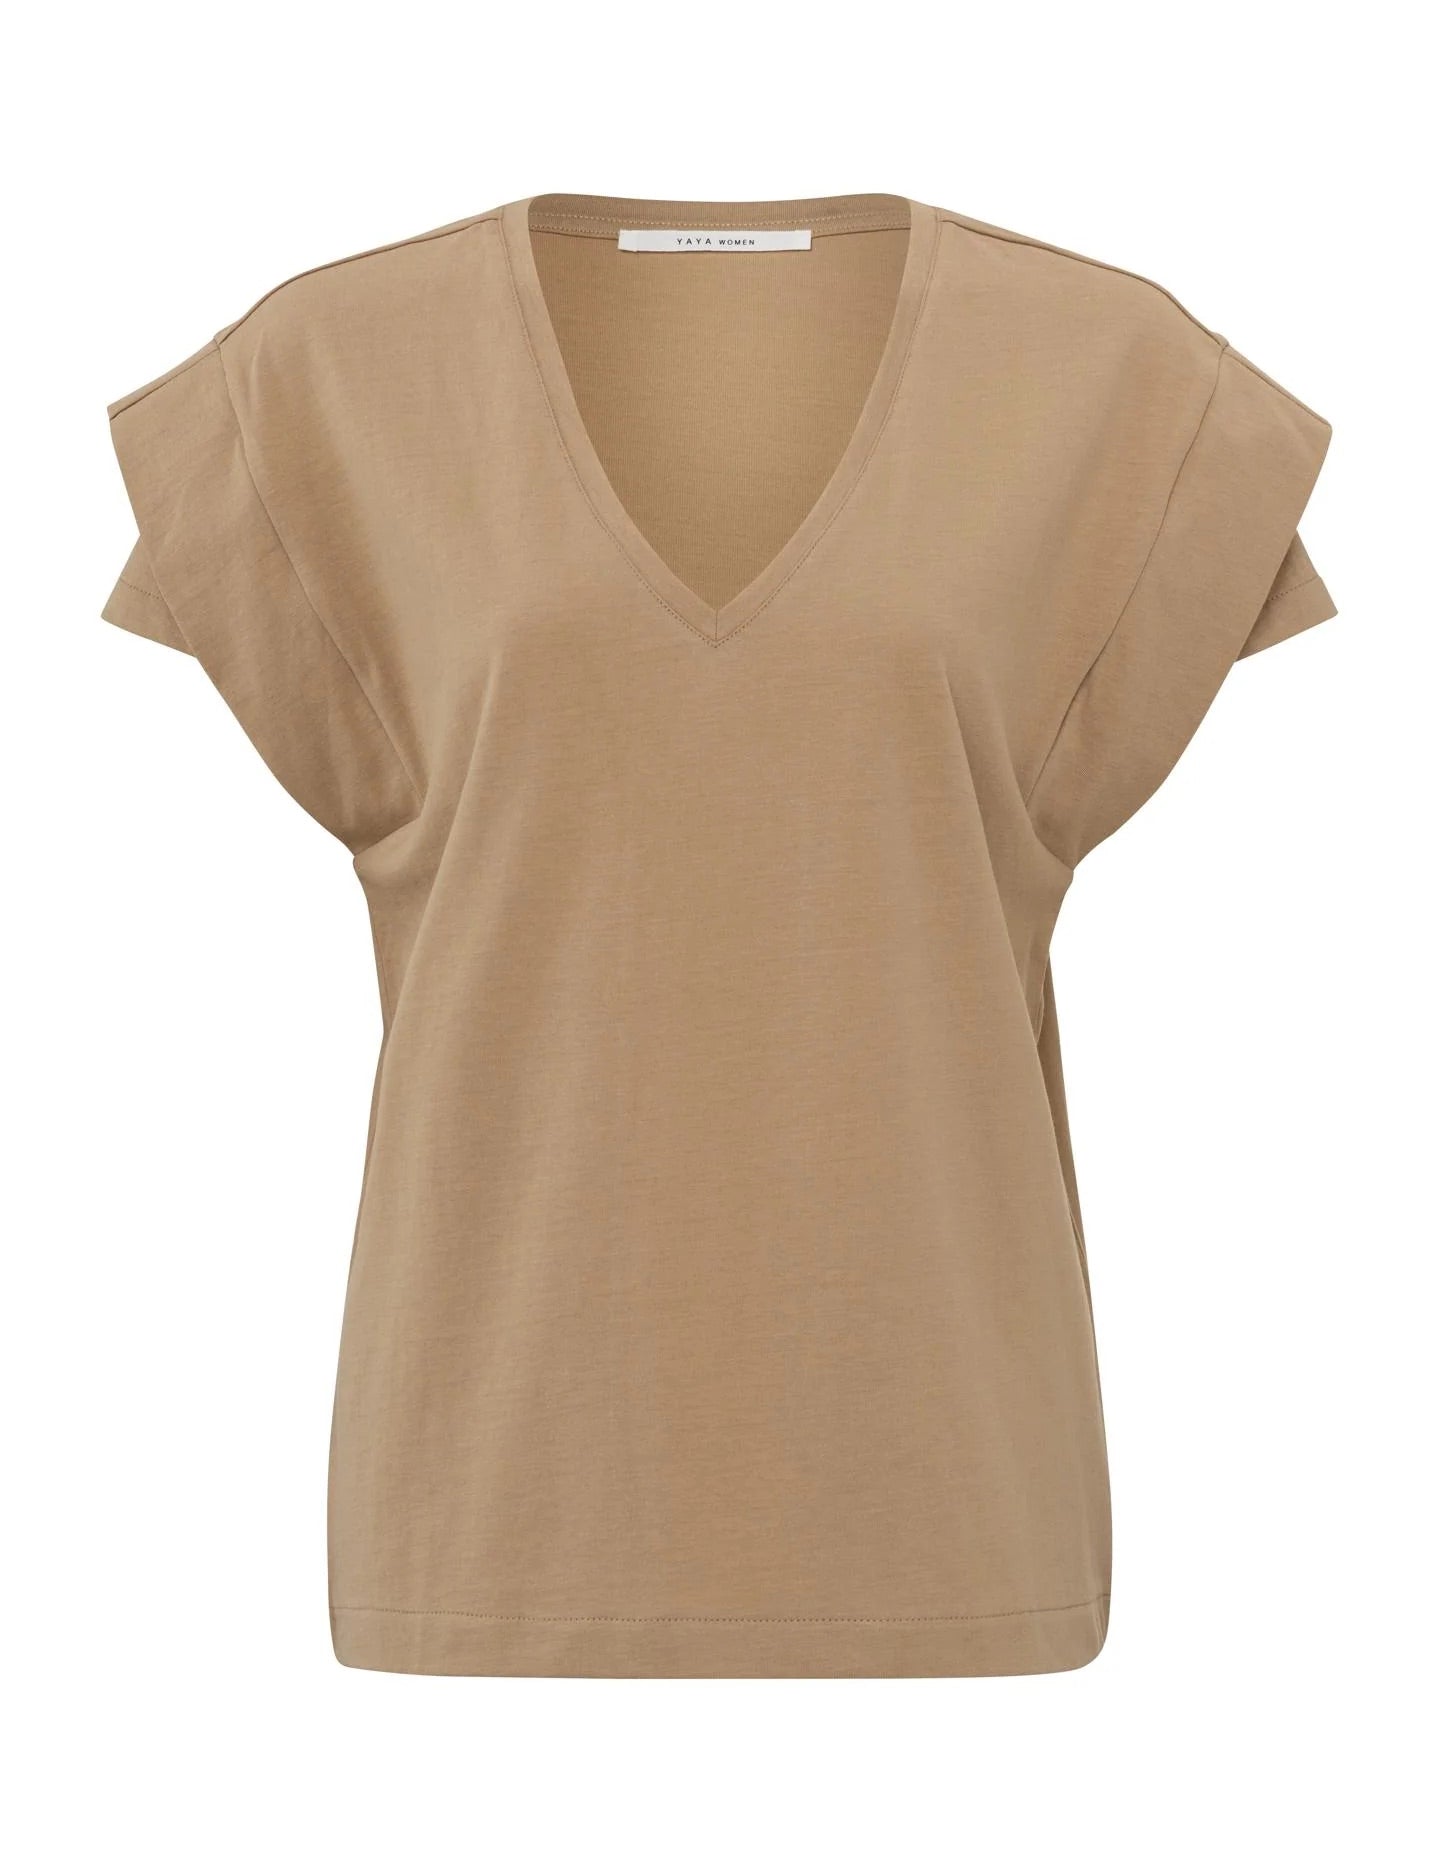 top-with-v-neck-and-double-short-sleeves-in-regular-fit-tannin-brown_2880x_jpg.jpg